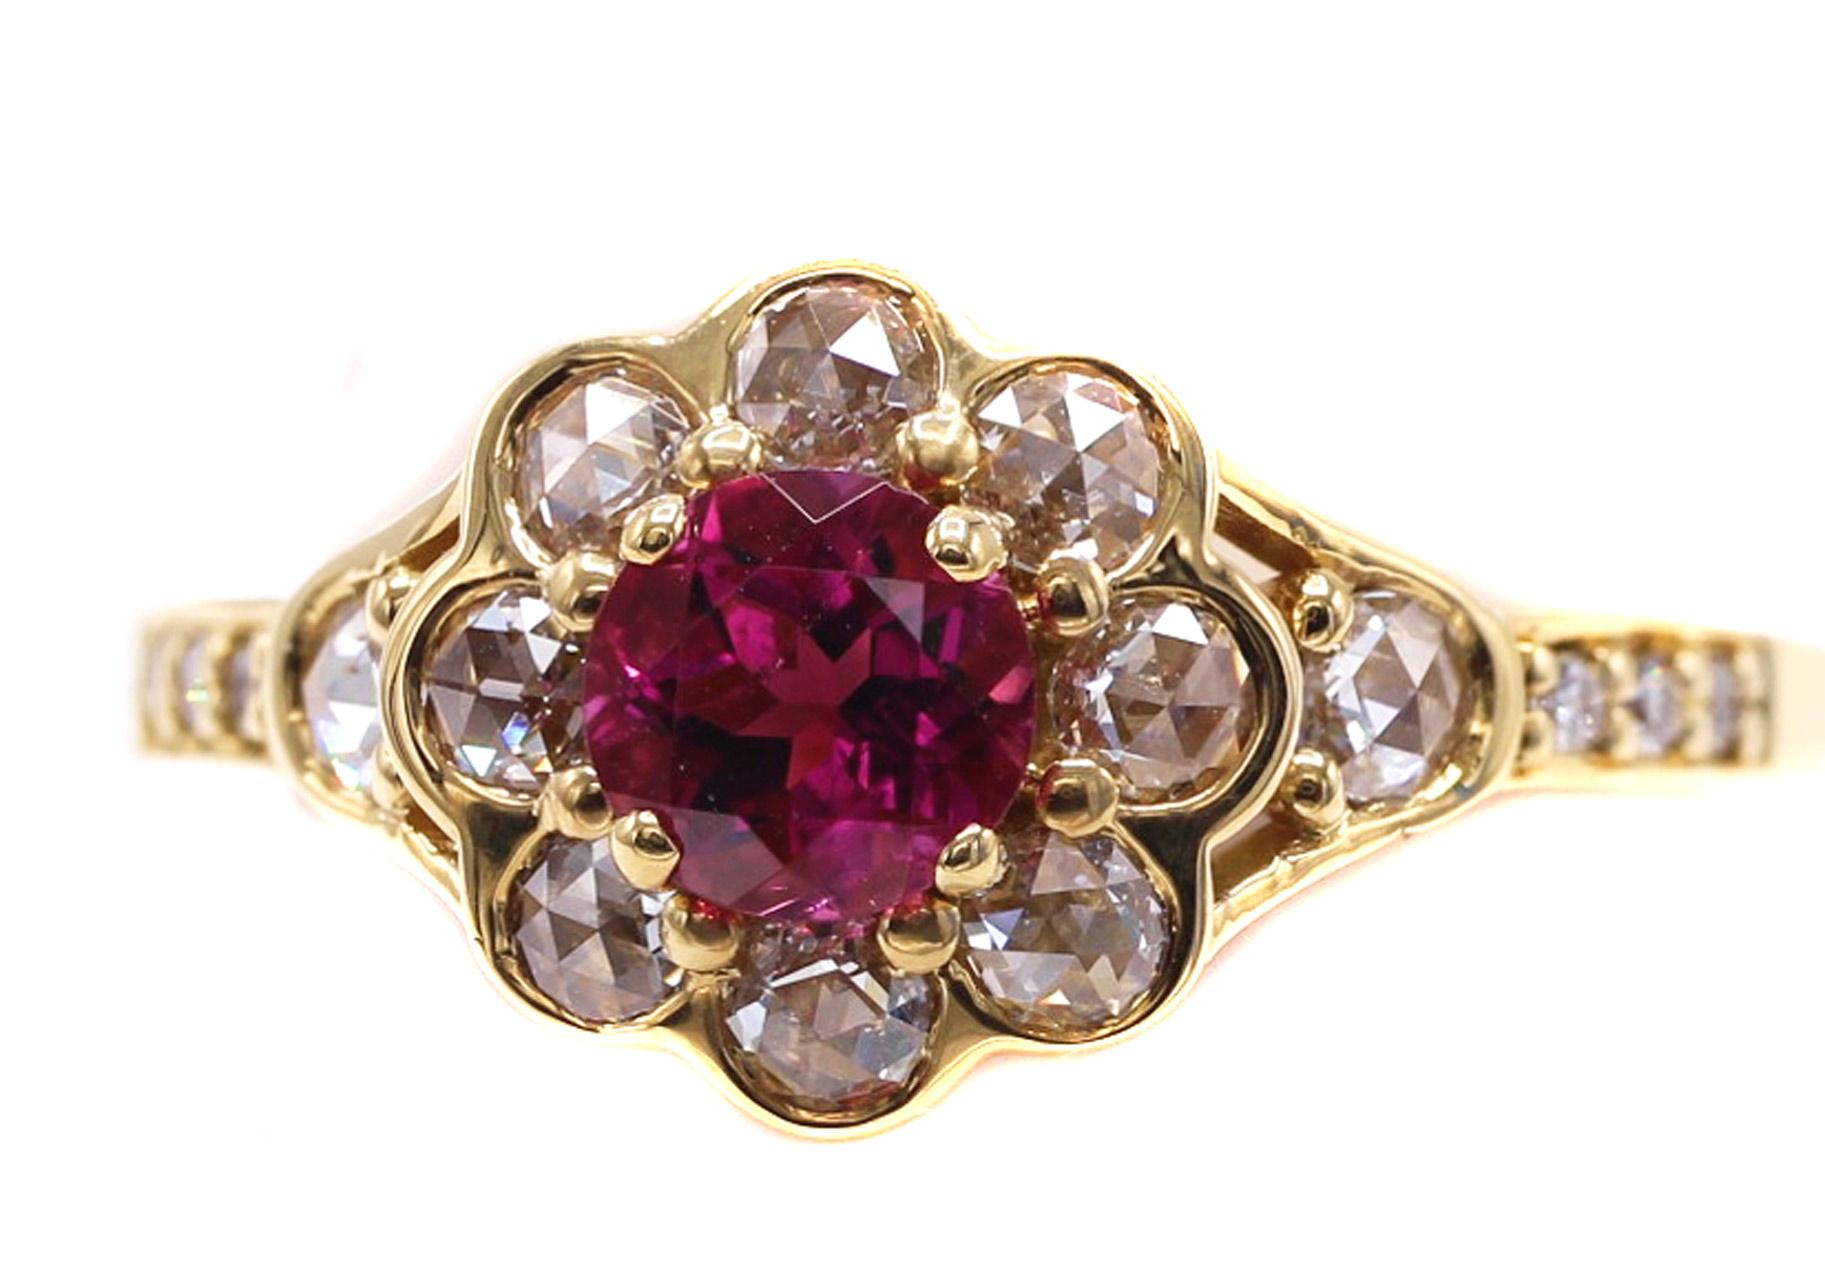 Beautifully designed and masterfully handcrafted this charming 18 Karat yellow gold ring features a vibrant pinkish red round Rubellite as the center piece. Surrounding the center gem are 8 perfectly matched rose cut diamonds bezel set with either